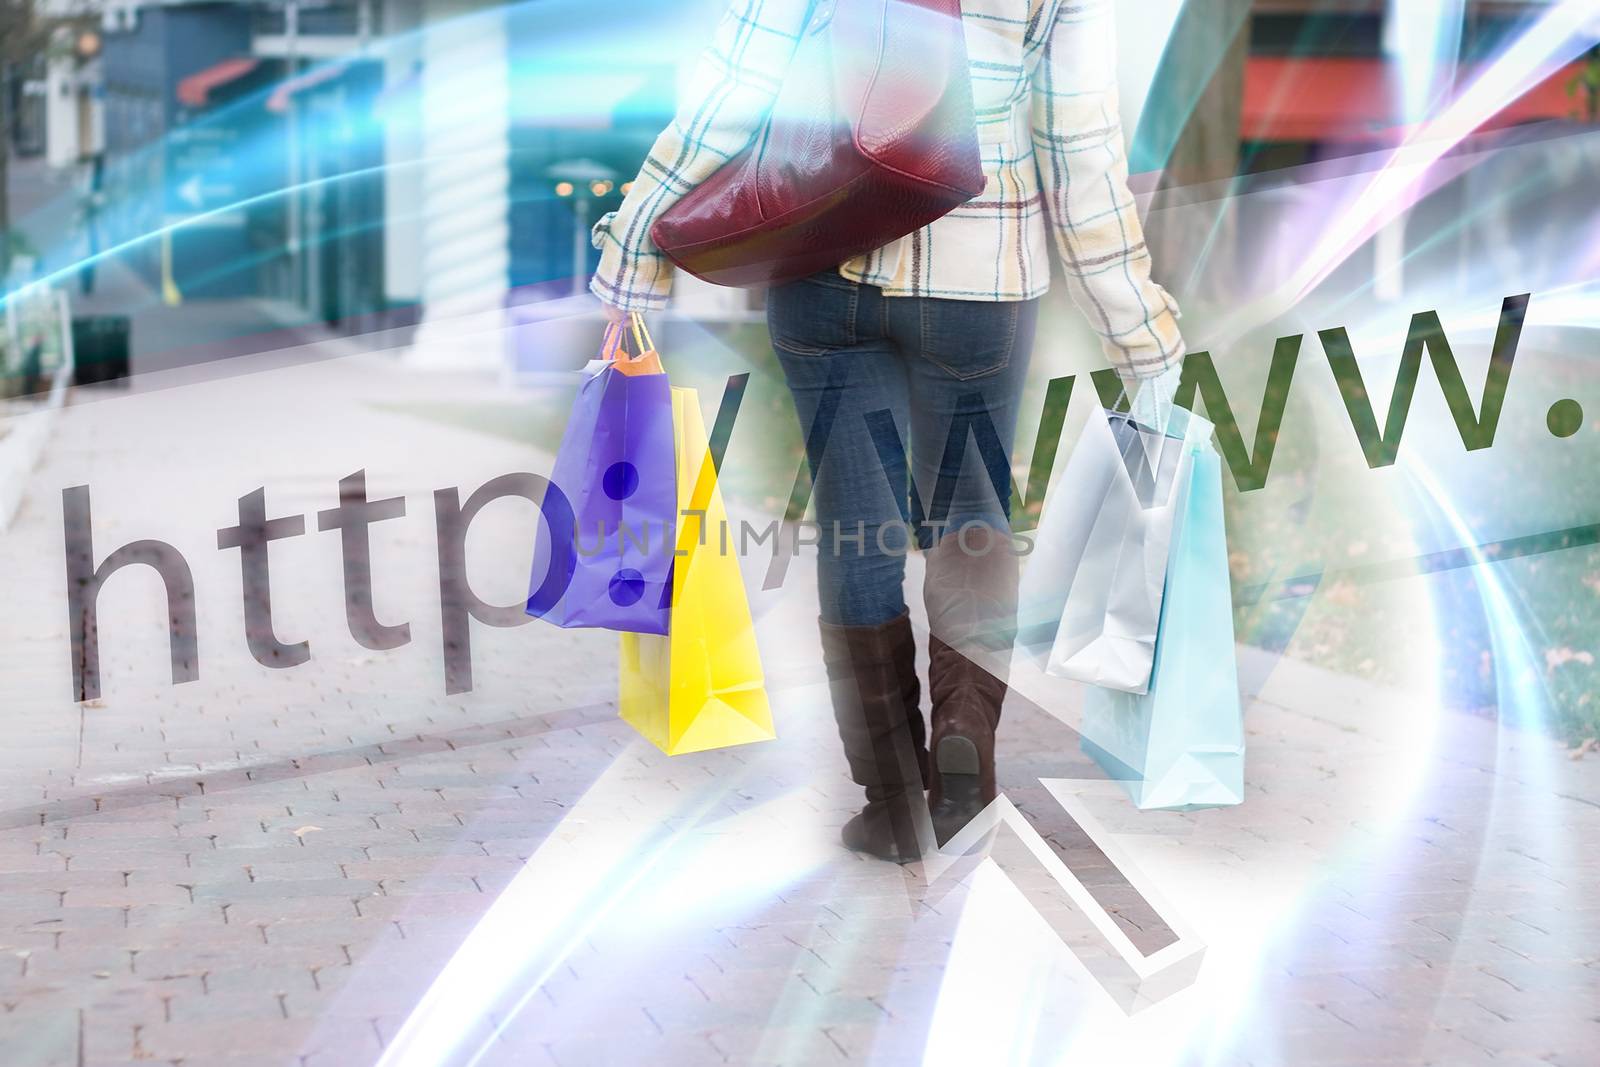 Abstract online shopping concept where a woman is walking holding bags with a website url address bar overlay.